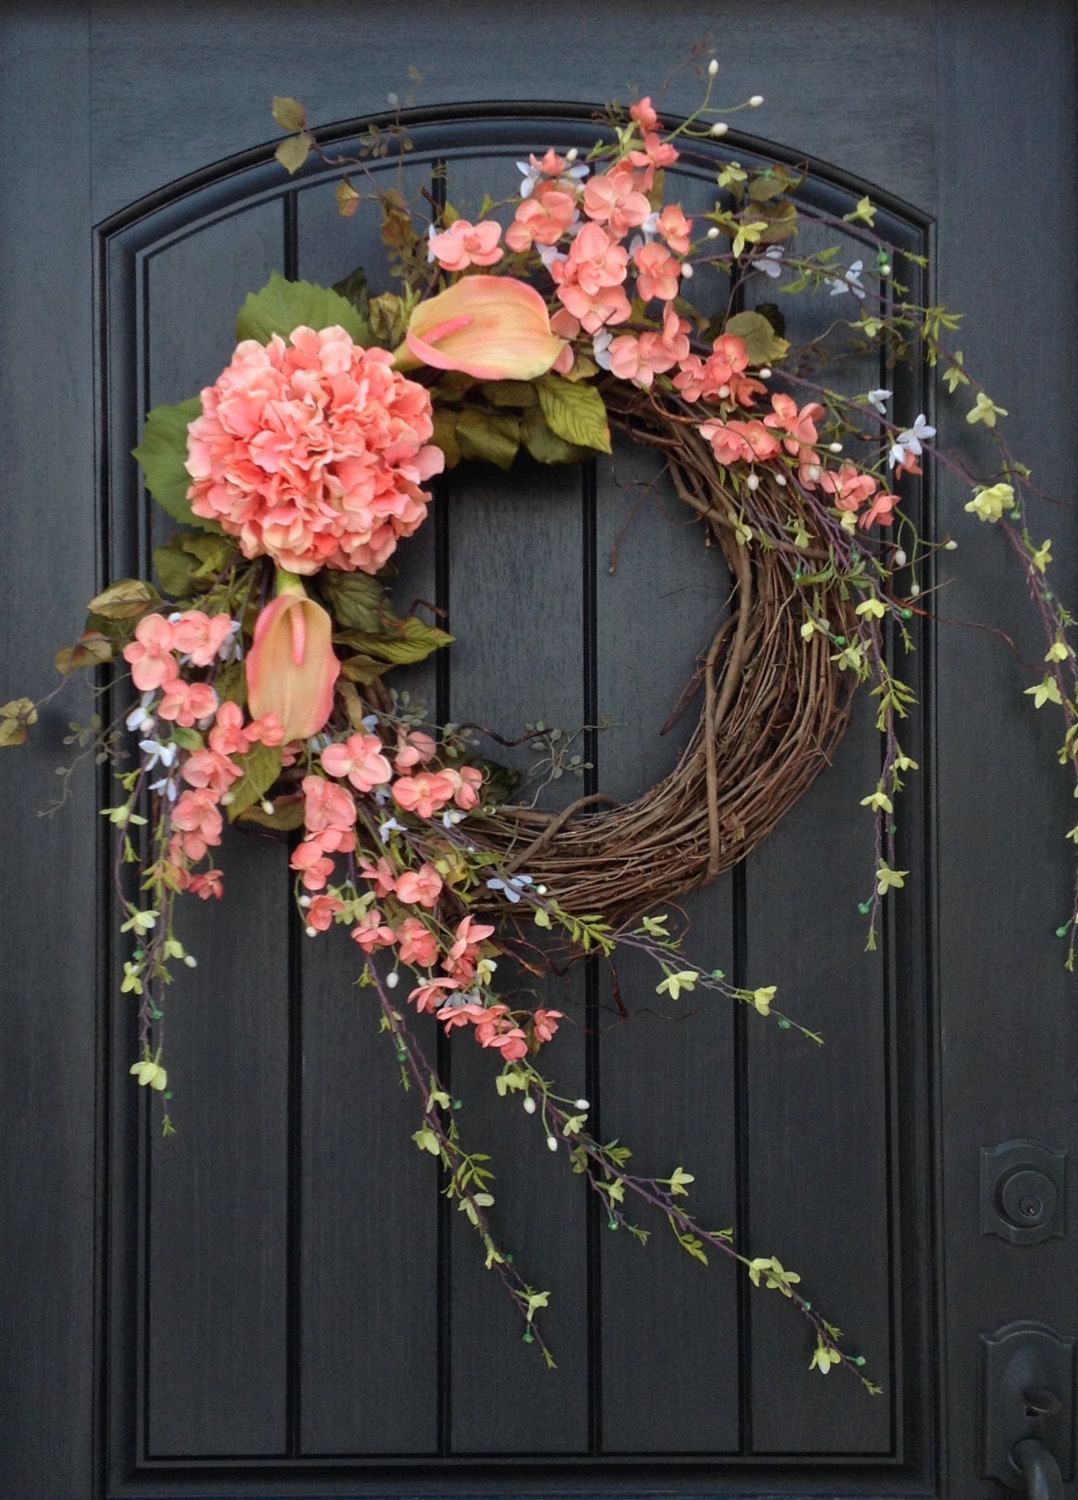 Spring Wreath Summer Wreath Floral White Green Branches Door Wreath Grapevine Wreath Decor-Coral Peach Lilies Wispy Easter-Mothers